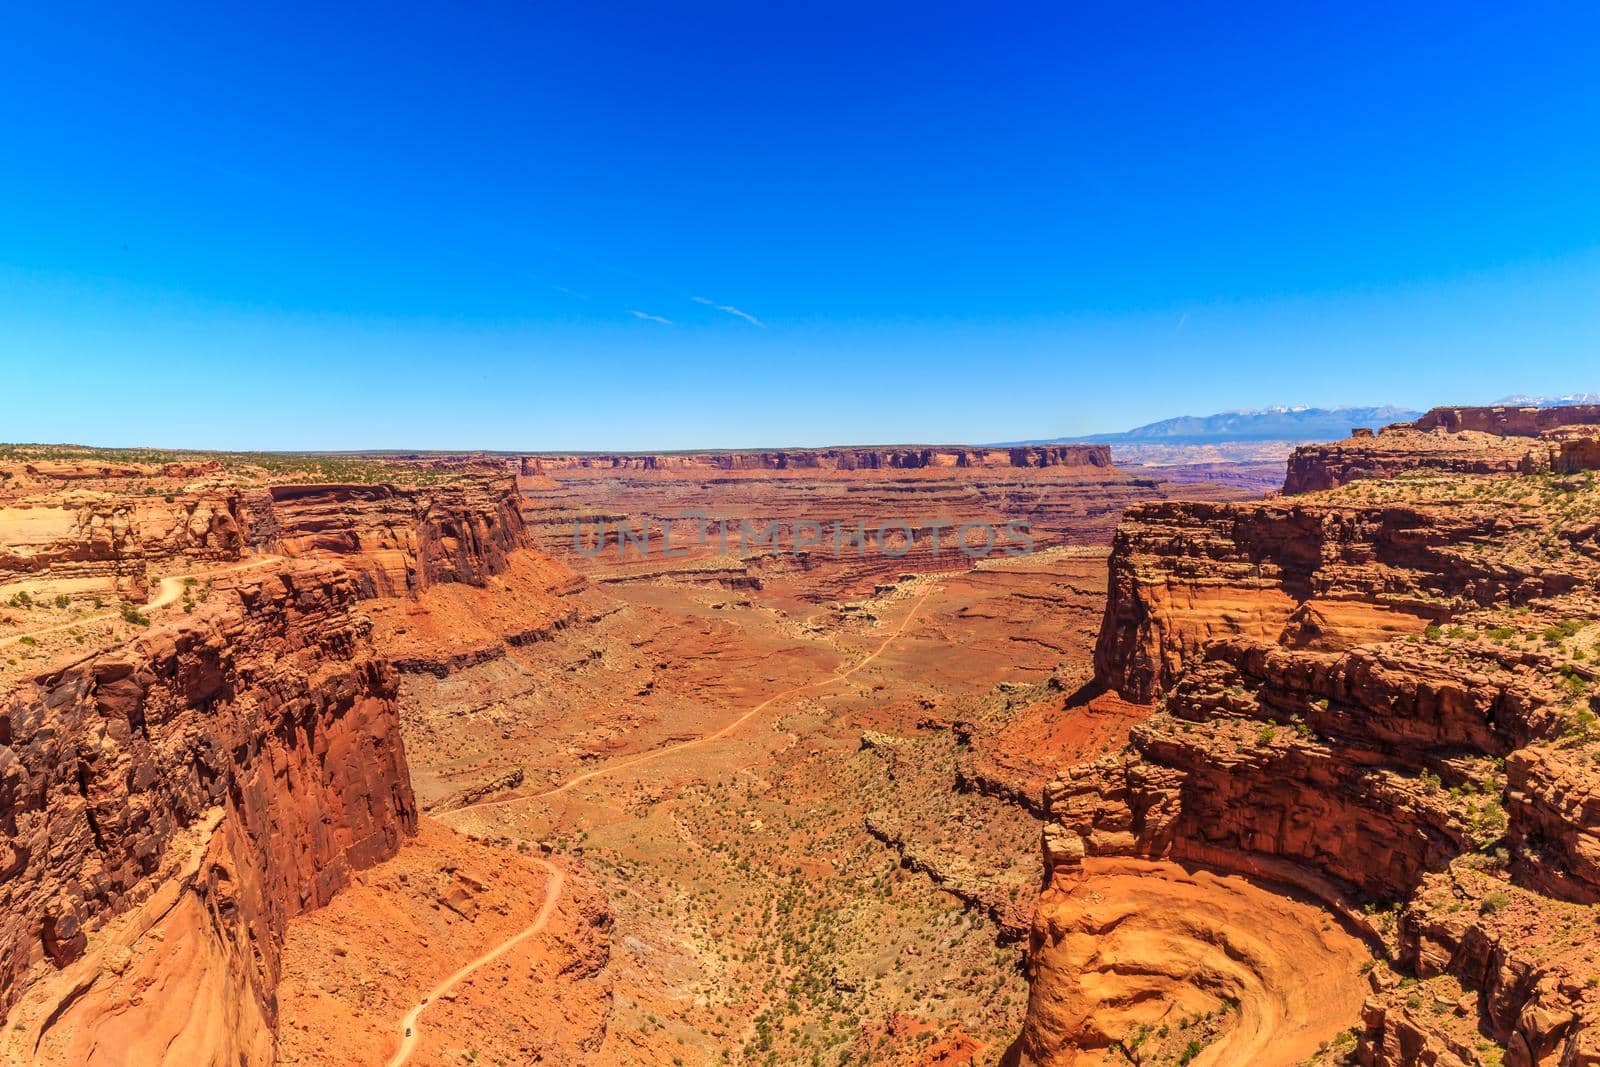 View of Shafer Canyon Overlook in Canyonlands National Park, Utah.